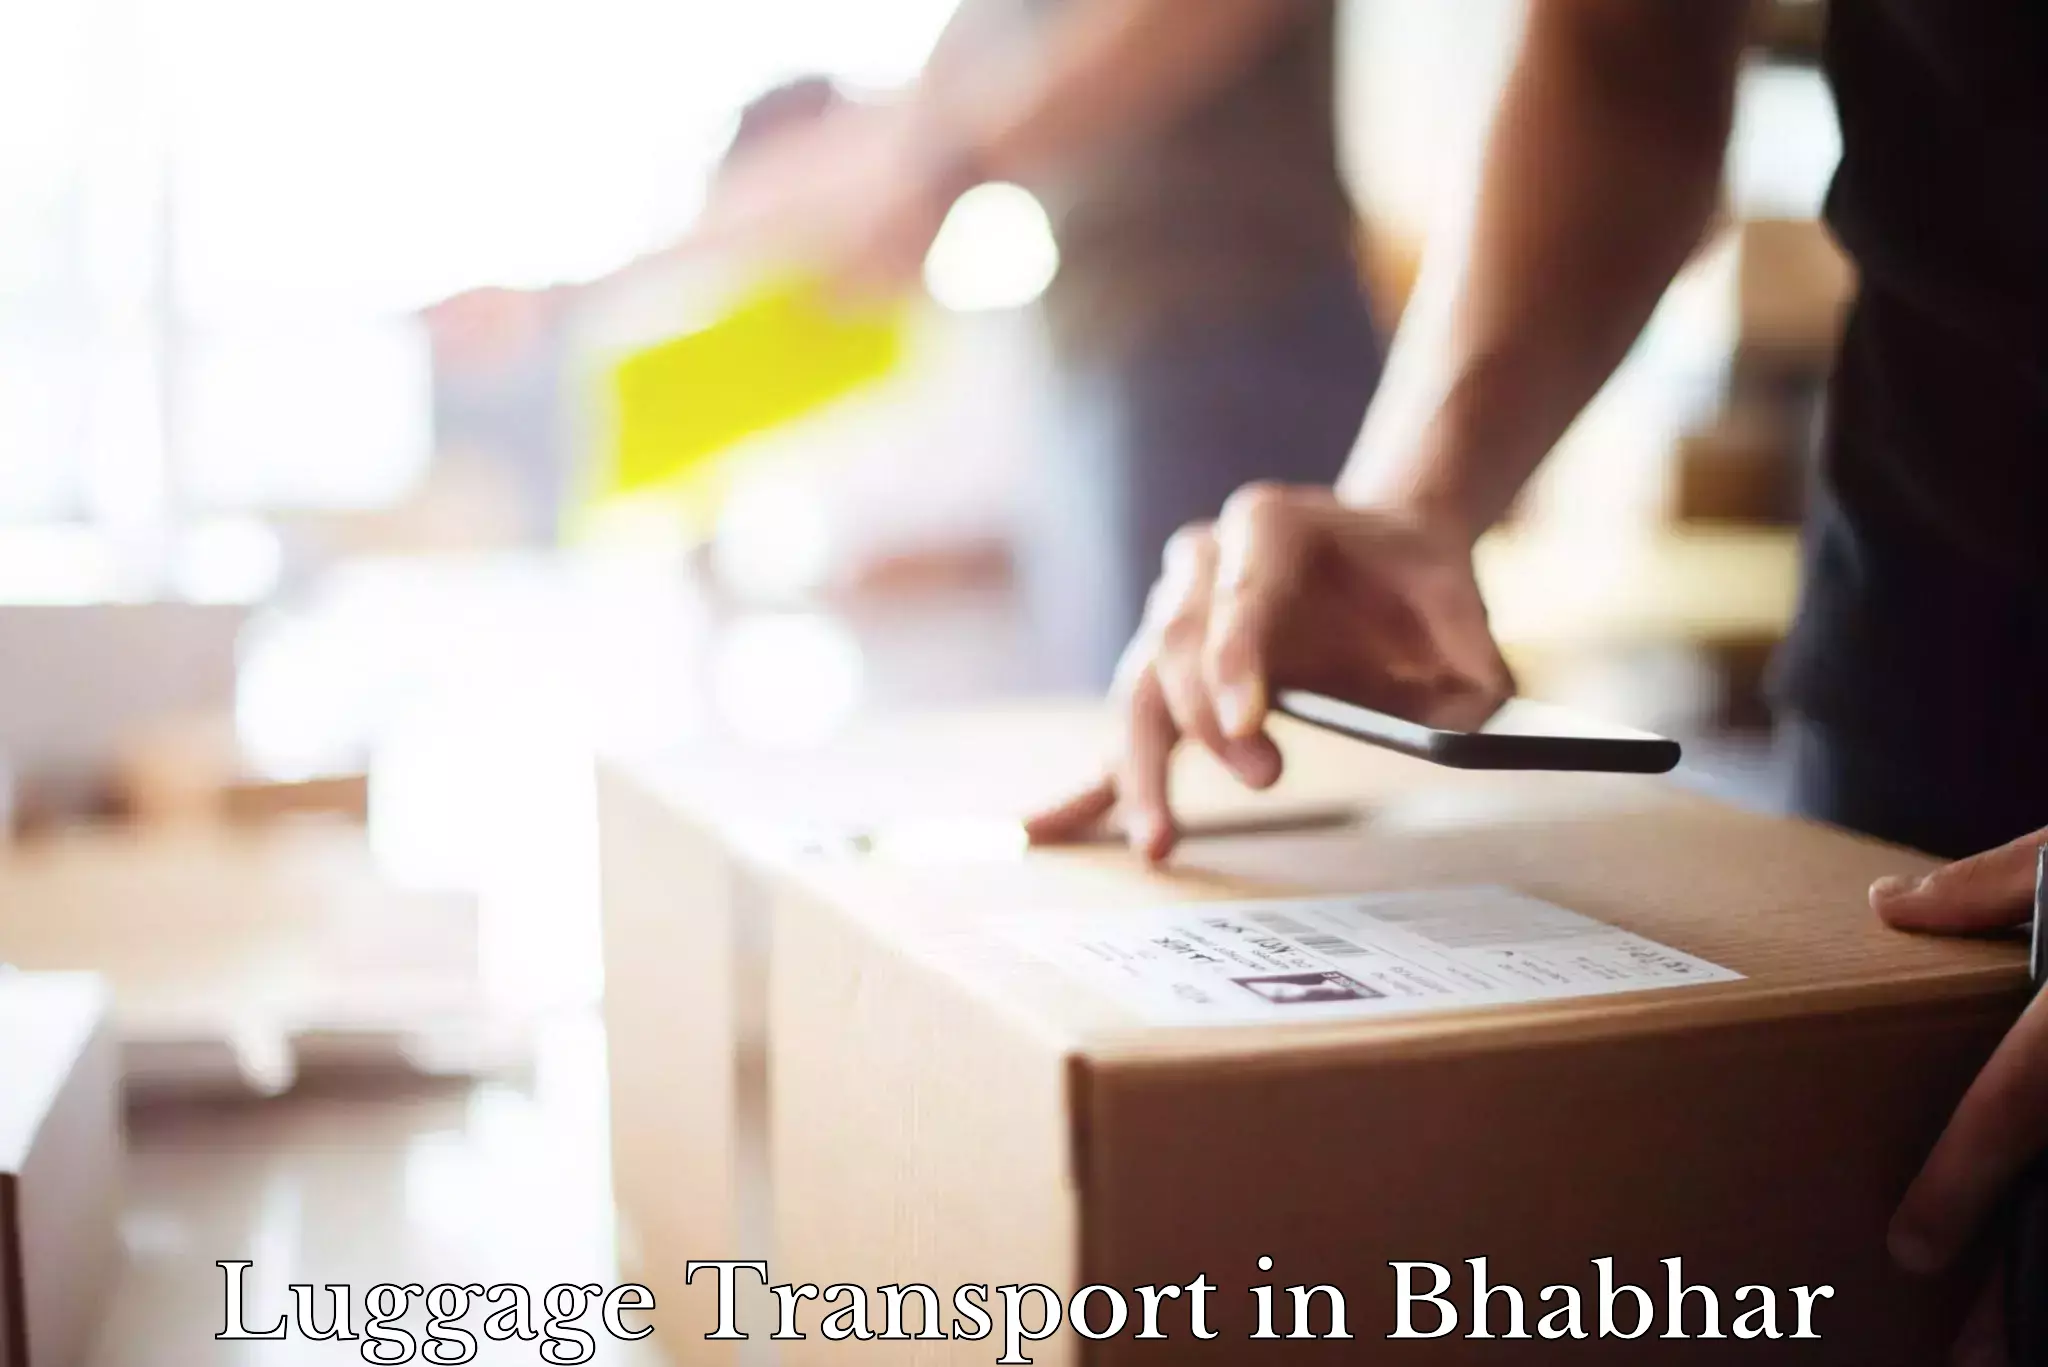 Luggage transport solutions in Bhabhar